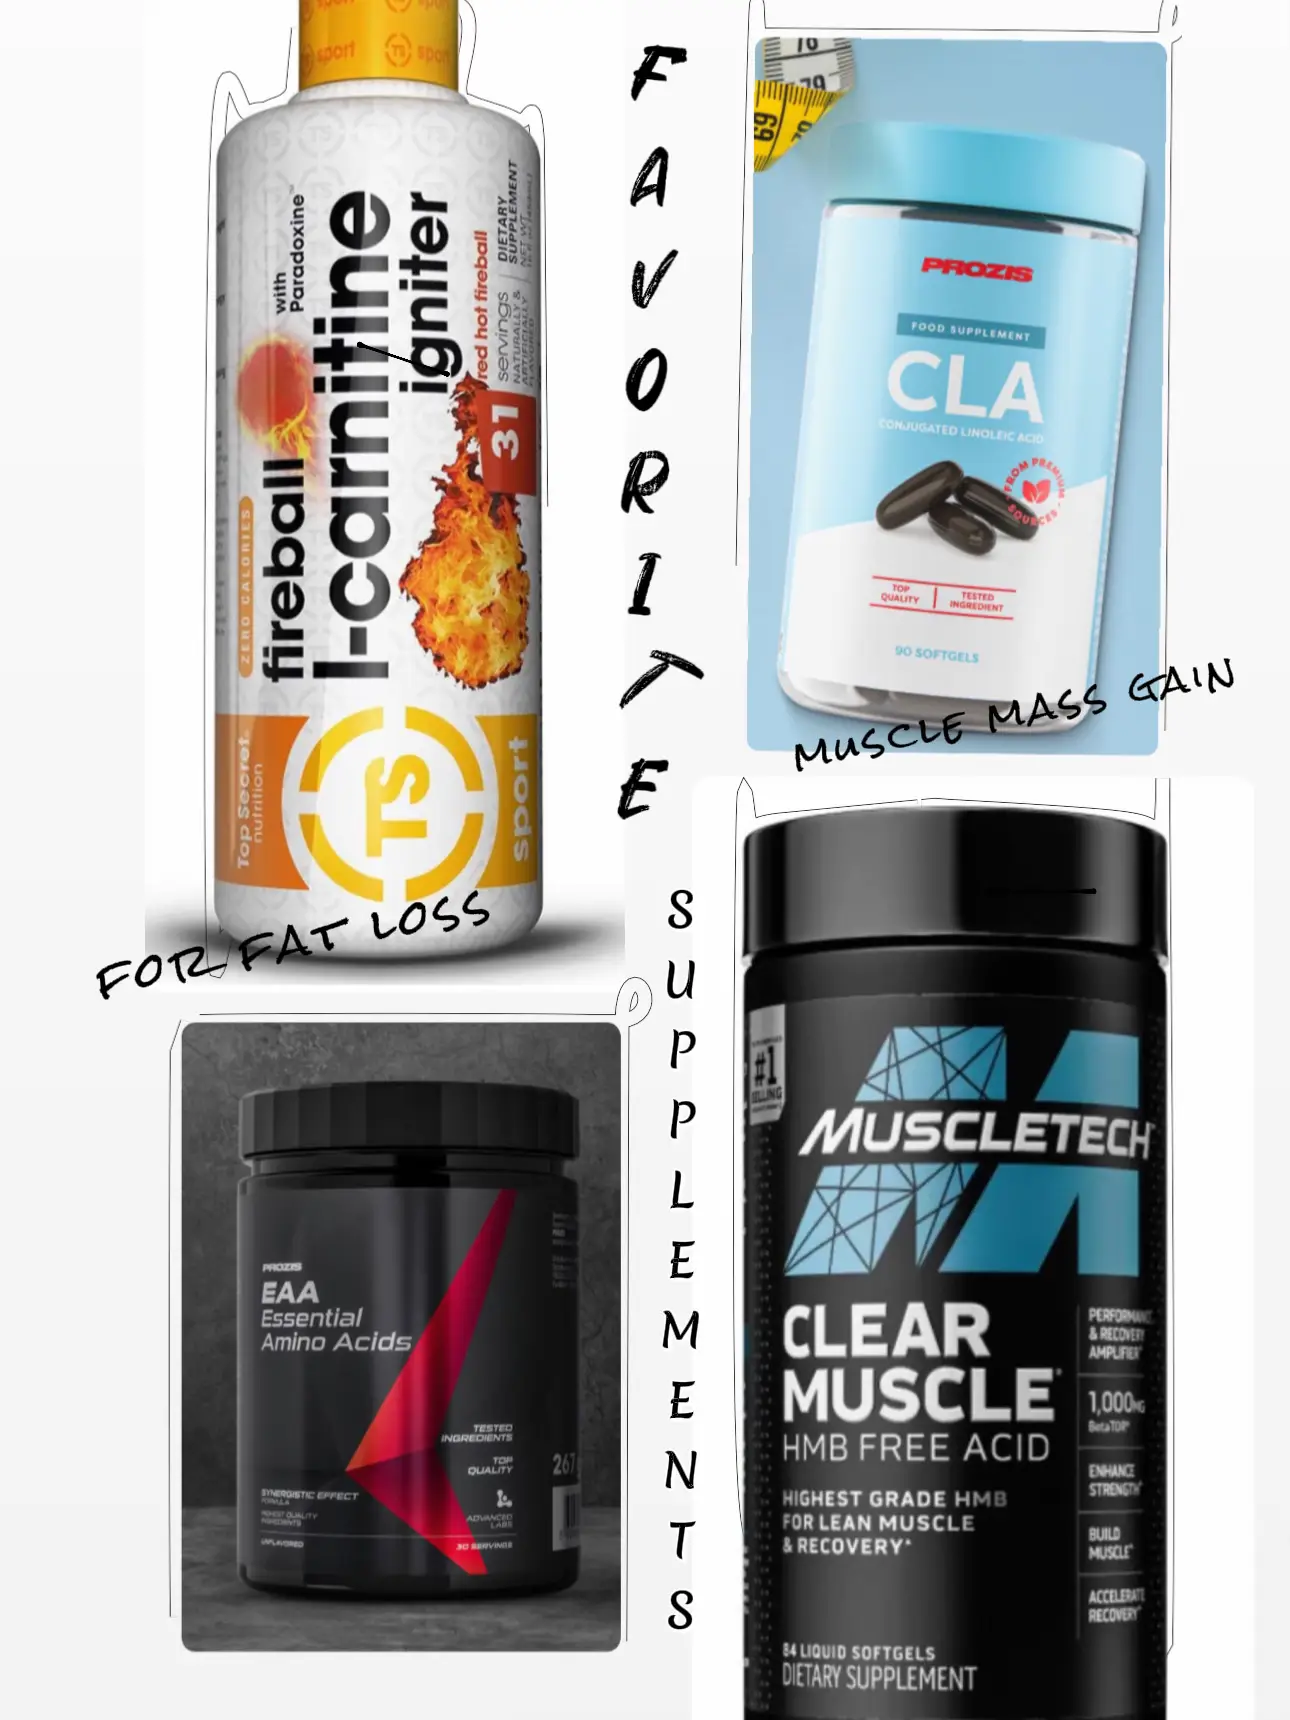 7 Prozis Supplements Tried and Tested for Excellent Workouts